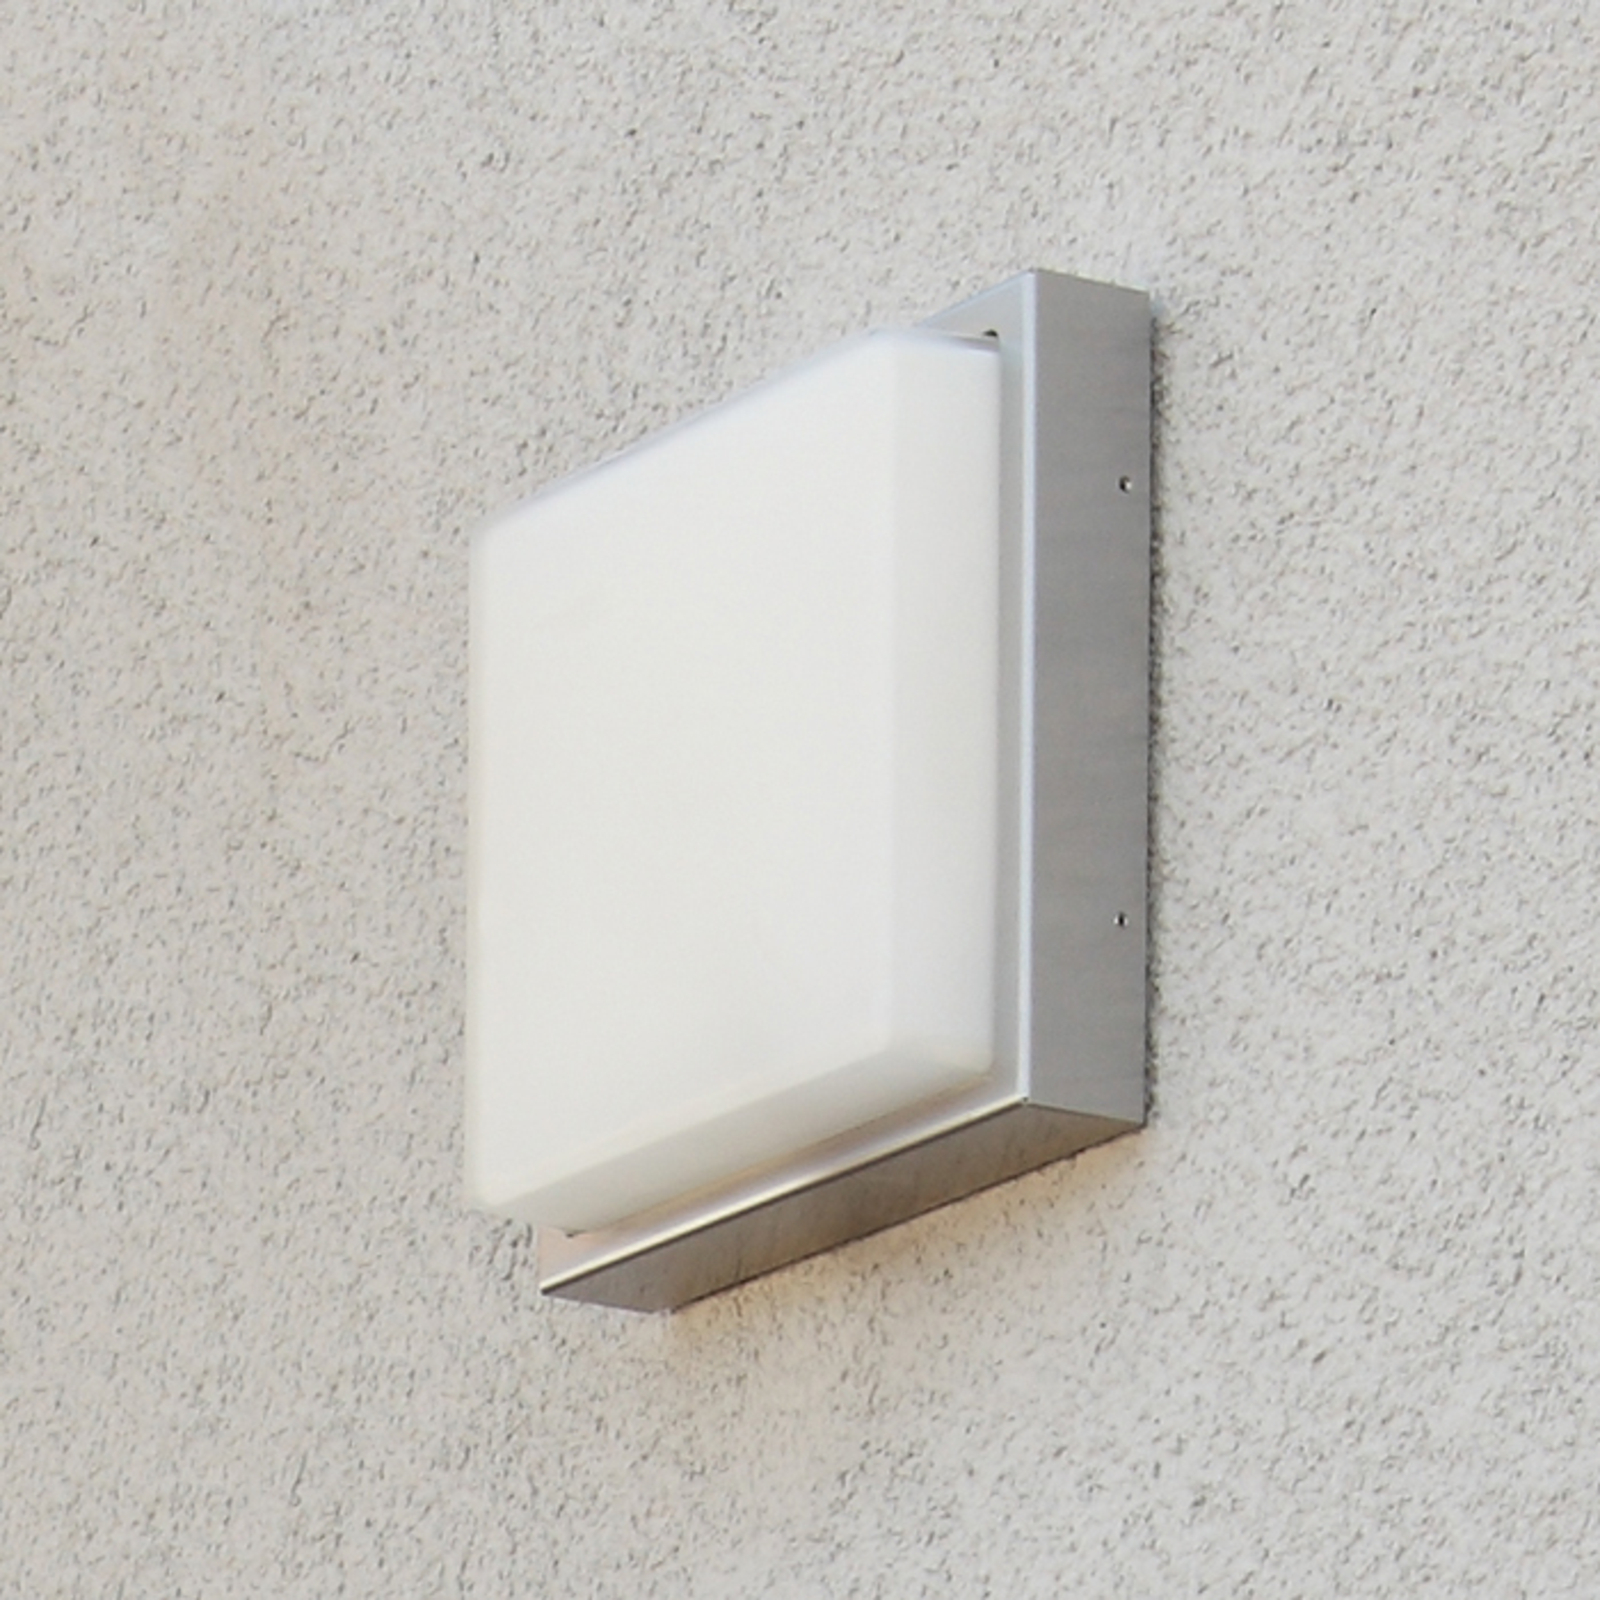 Stainless steel outdoor wall light 046